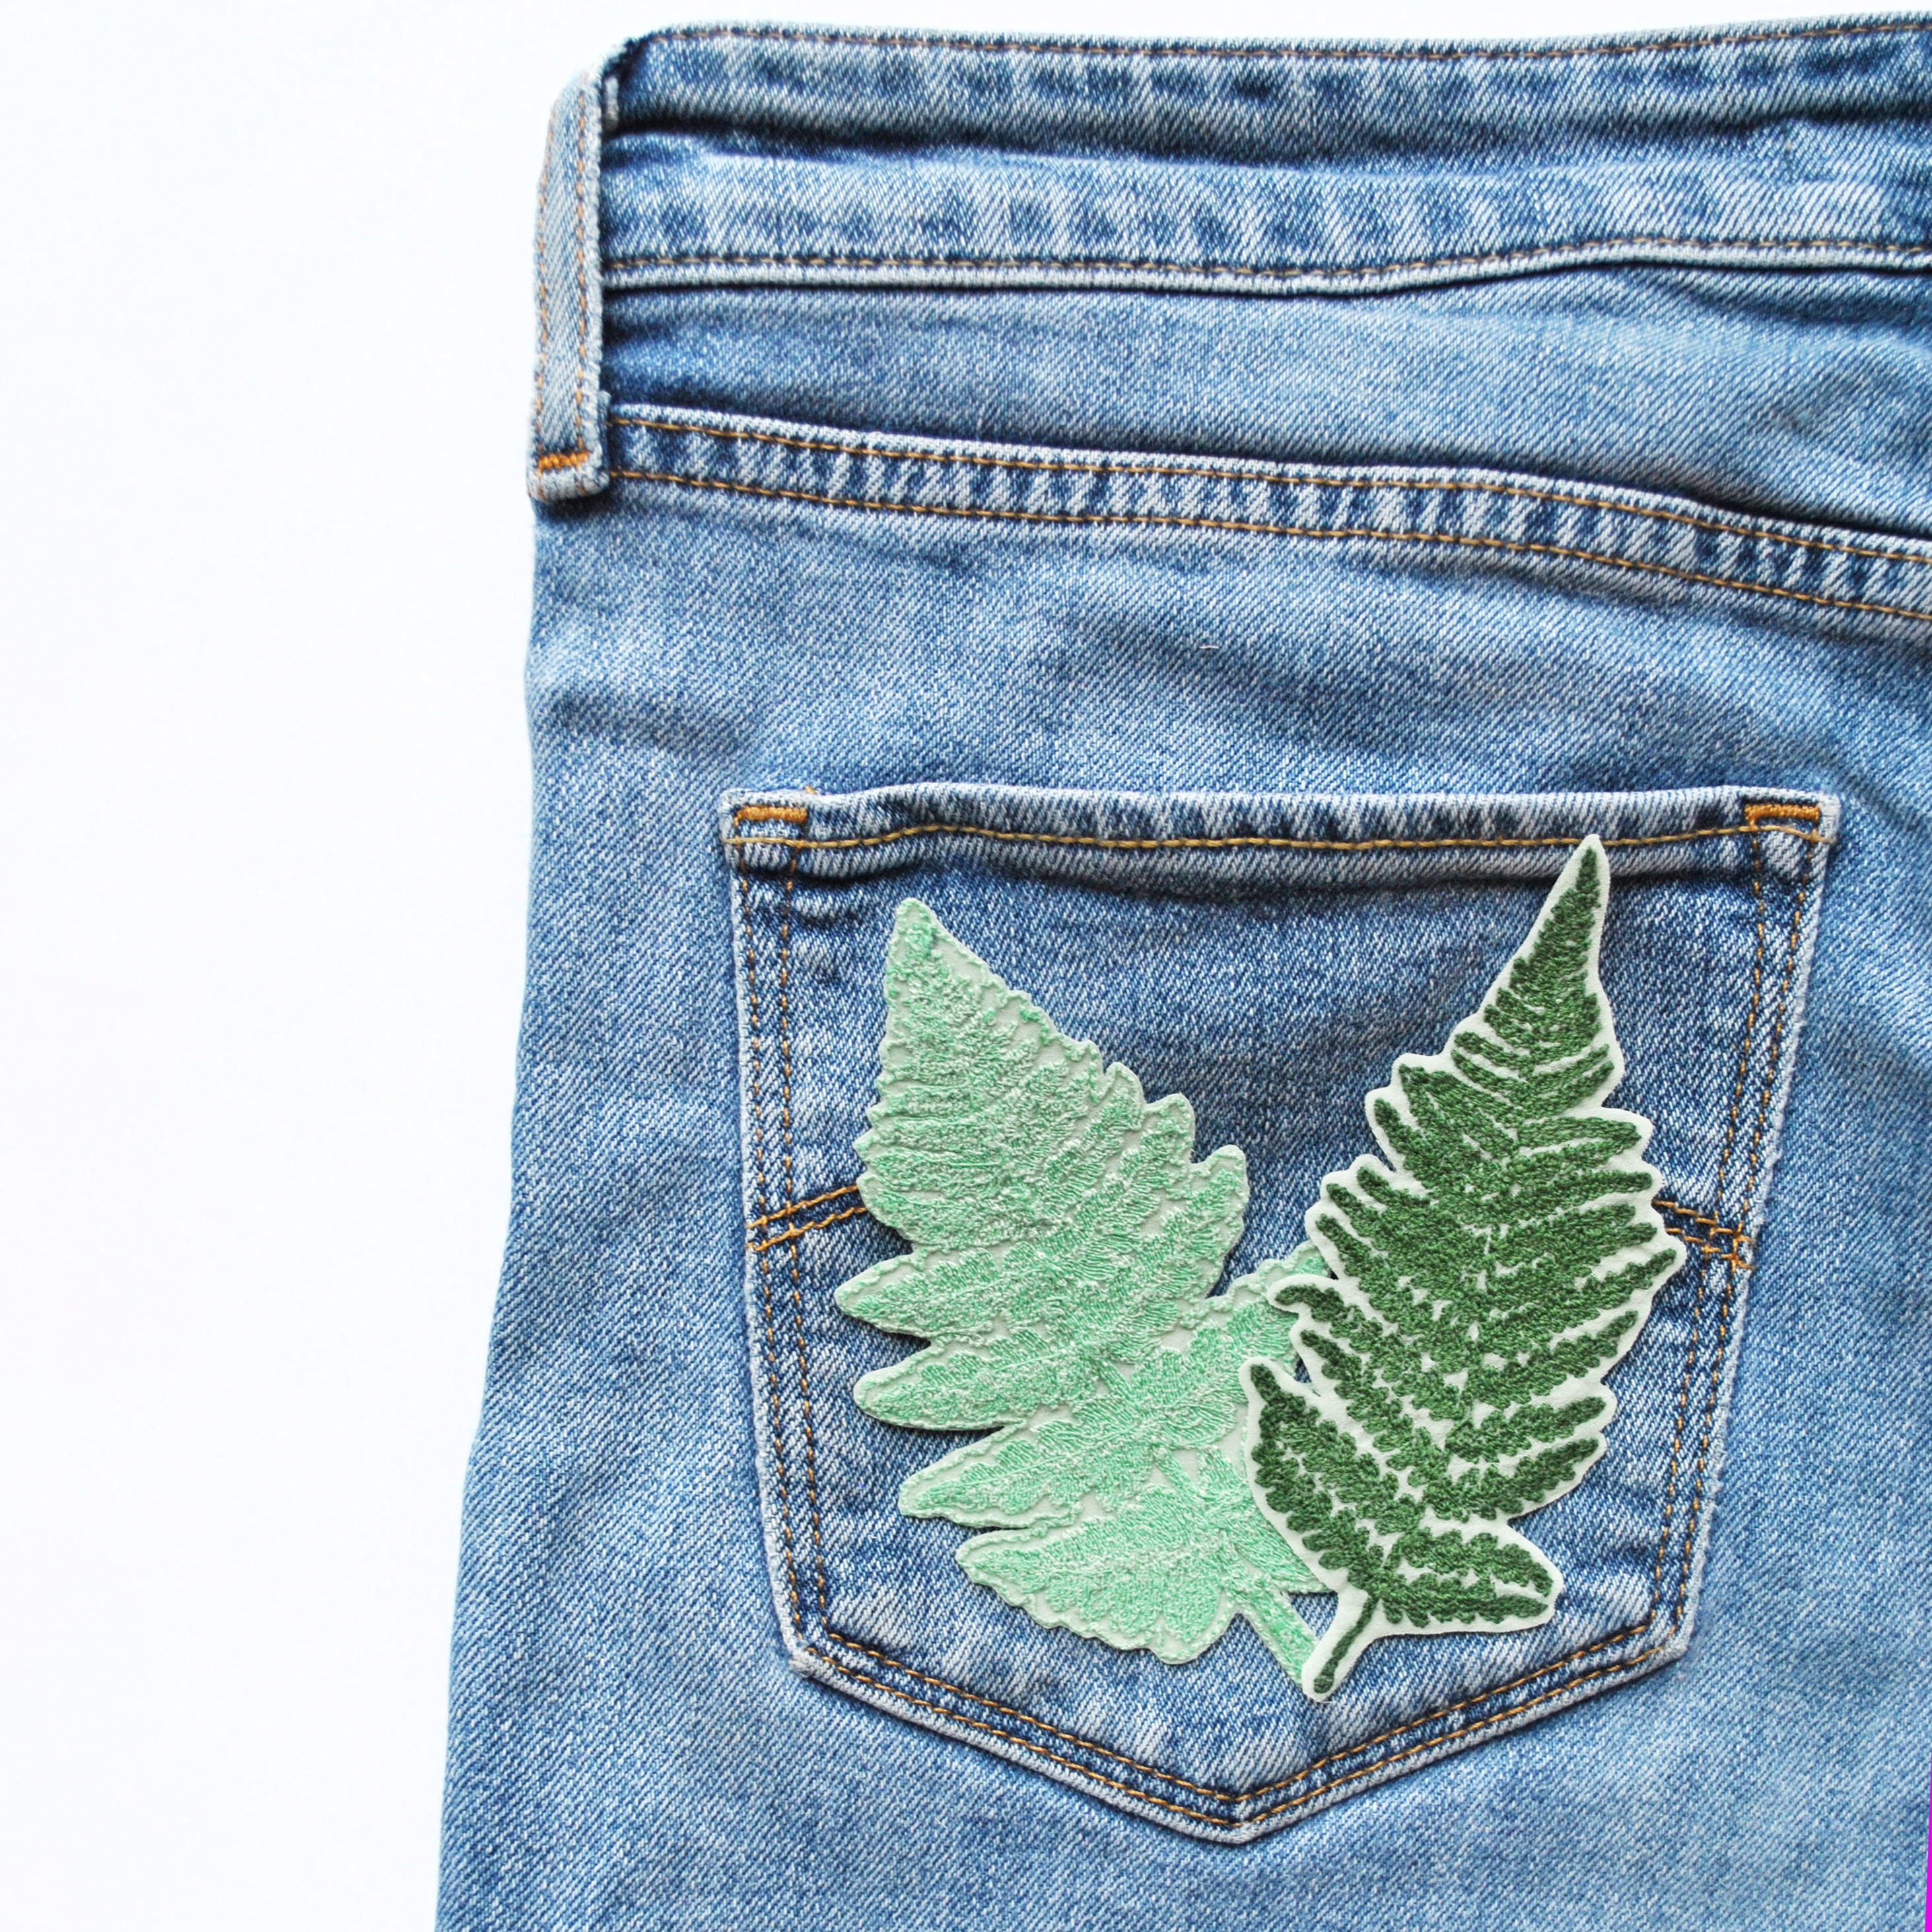 Fern Patches: 4 Pack